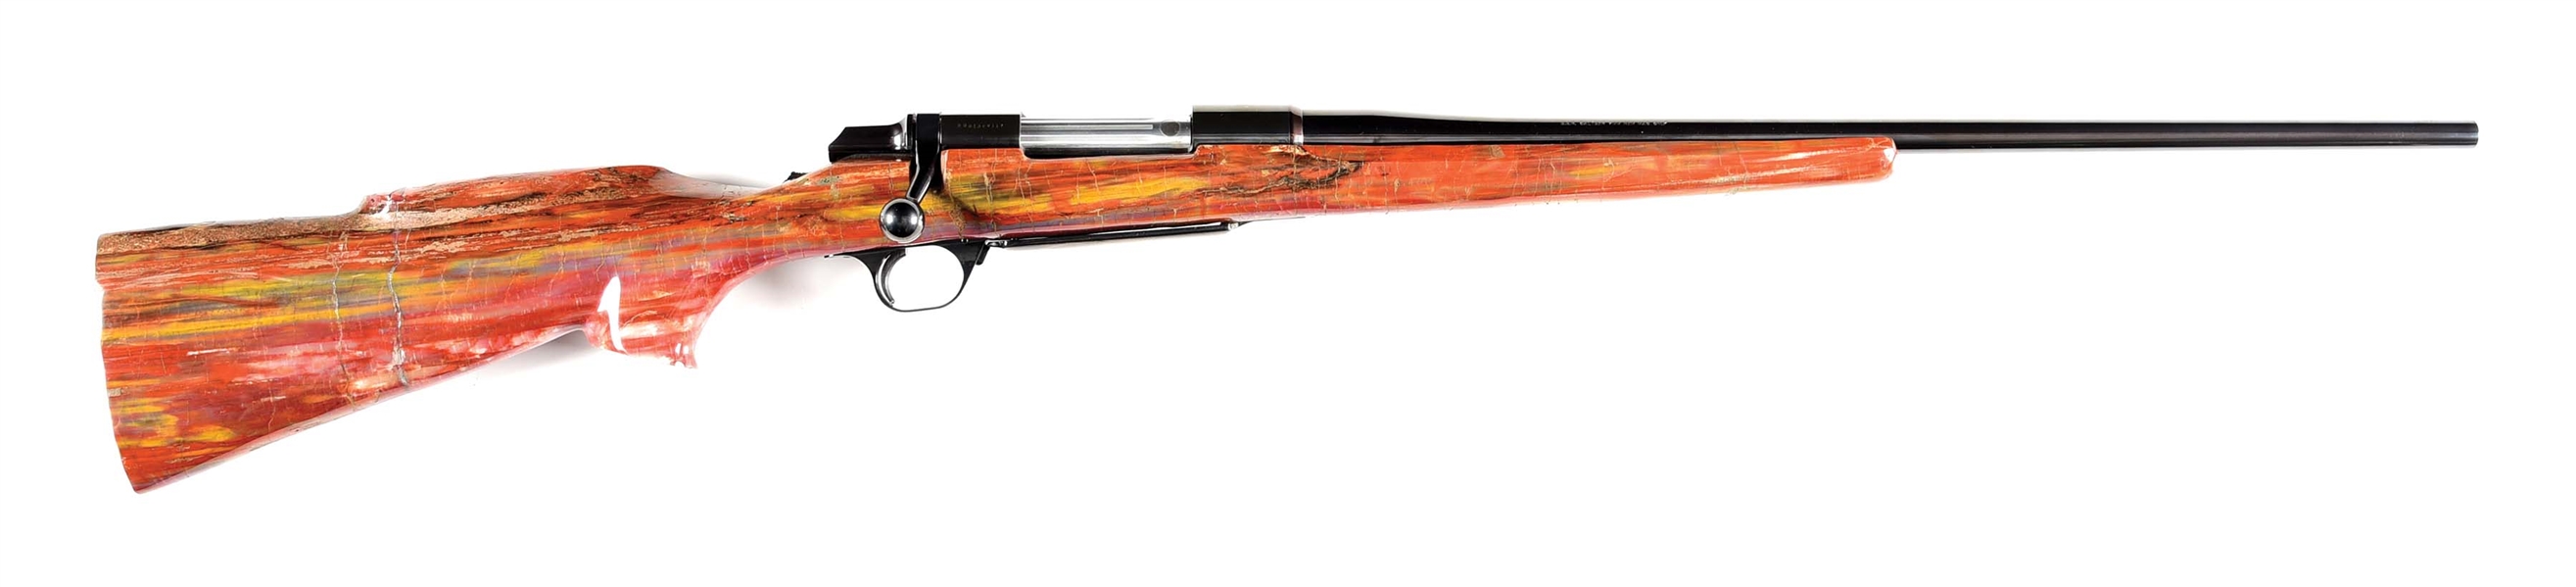 (M) PETRIFIED WOOD STOCKED BROWNING BBR BOLT ACTION RIFLE.